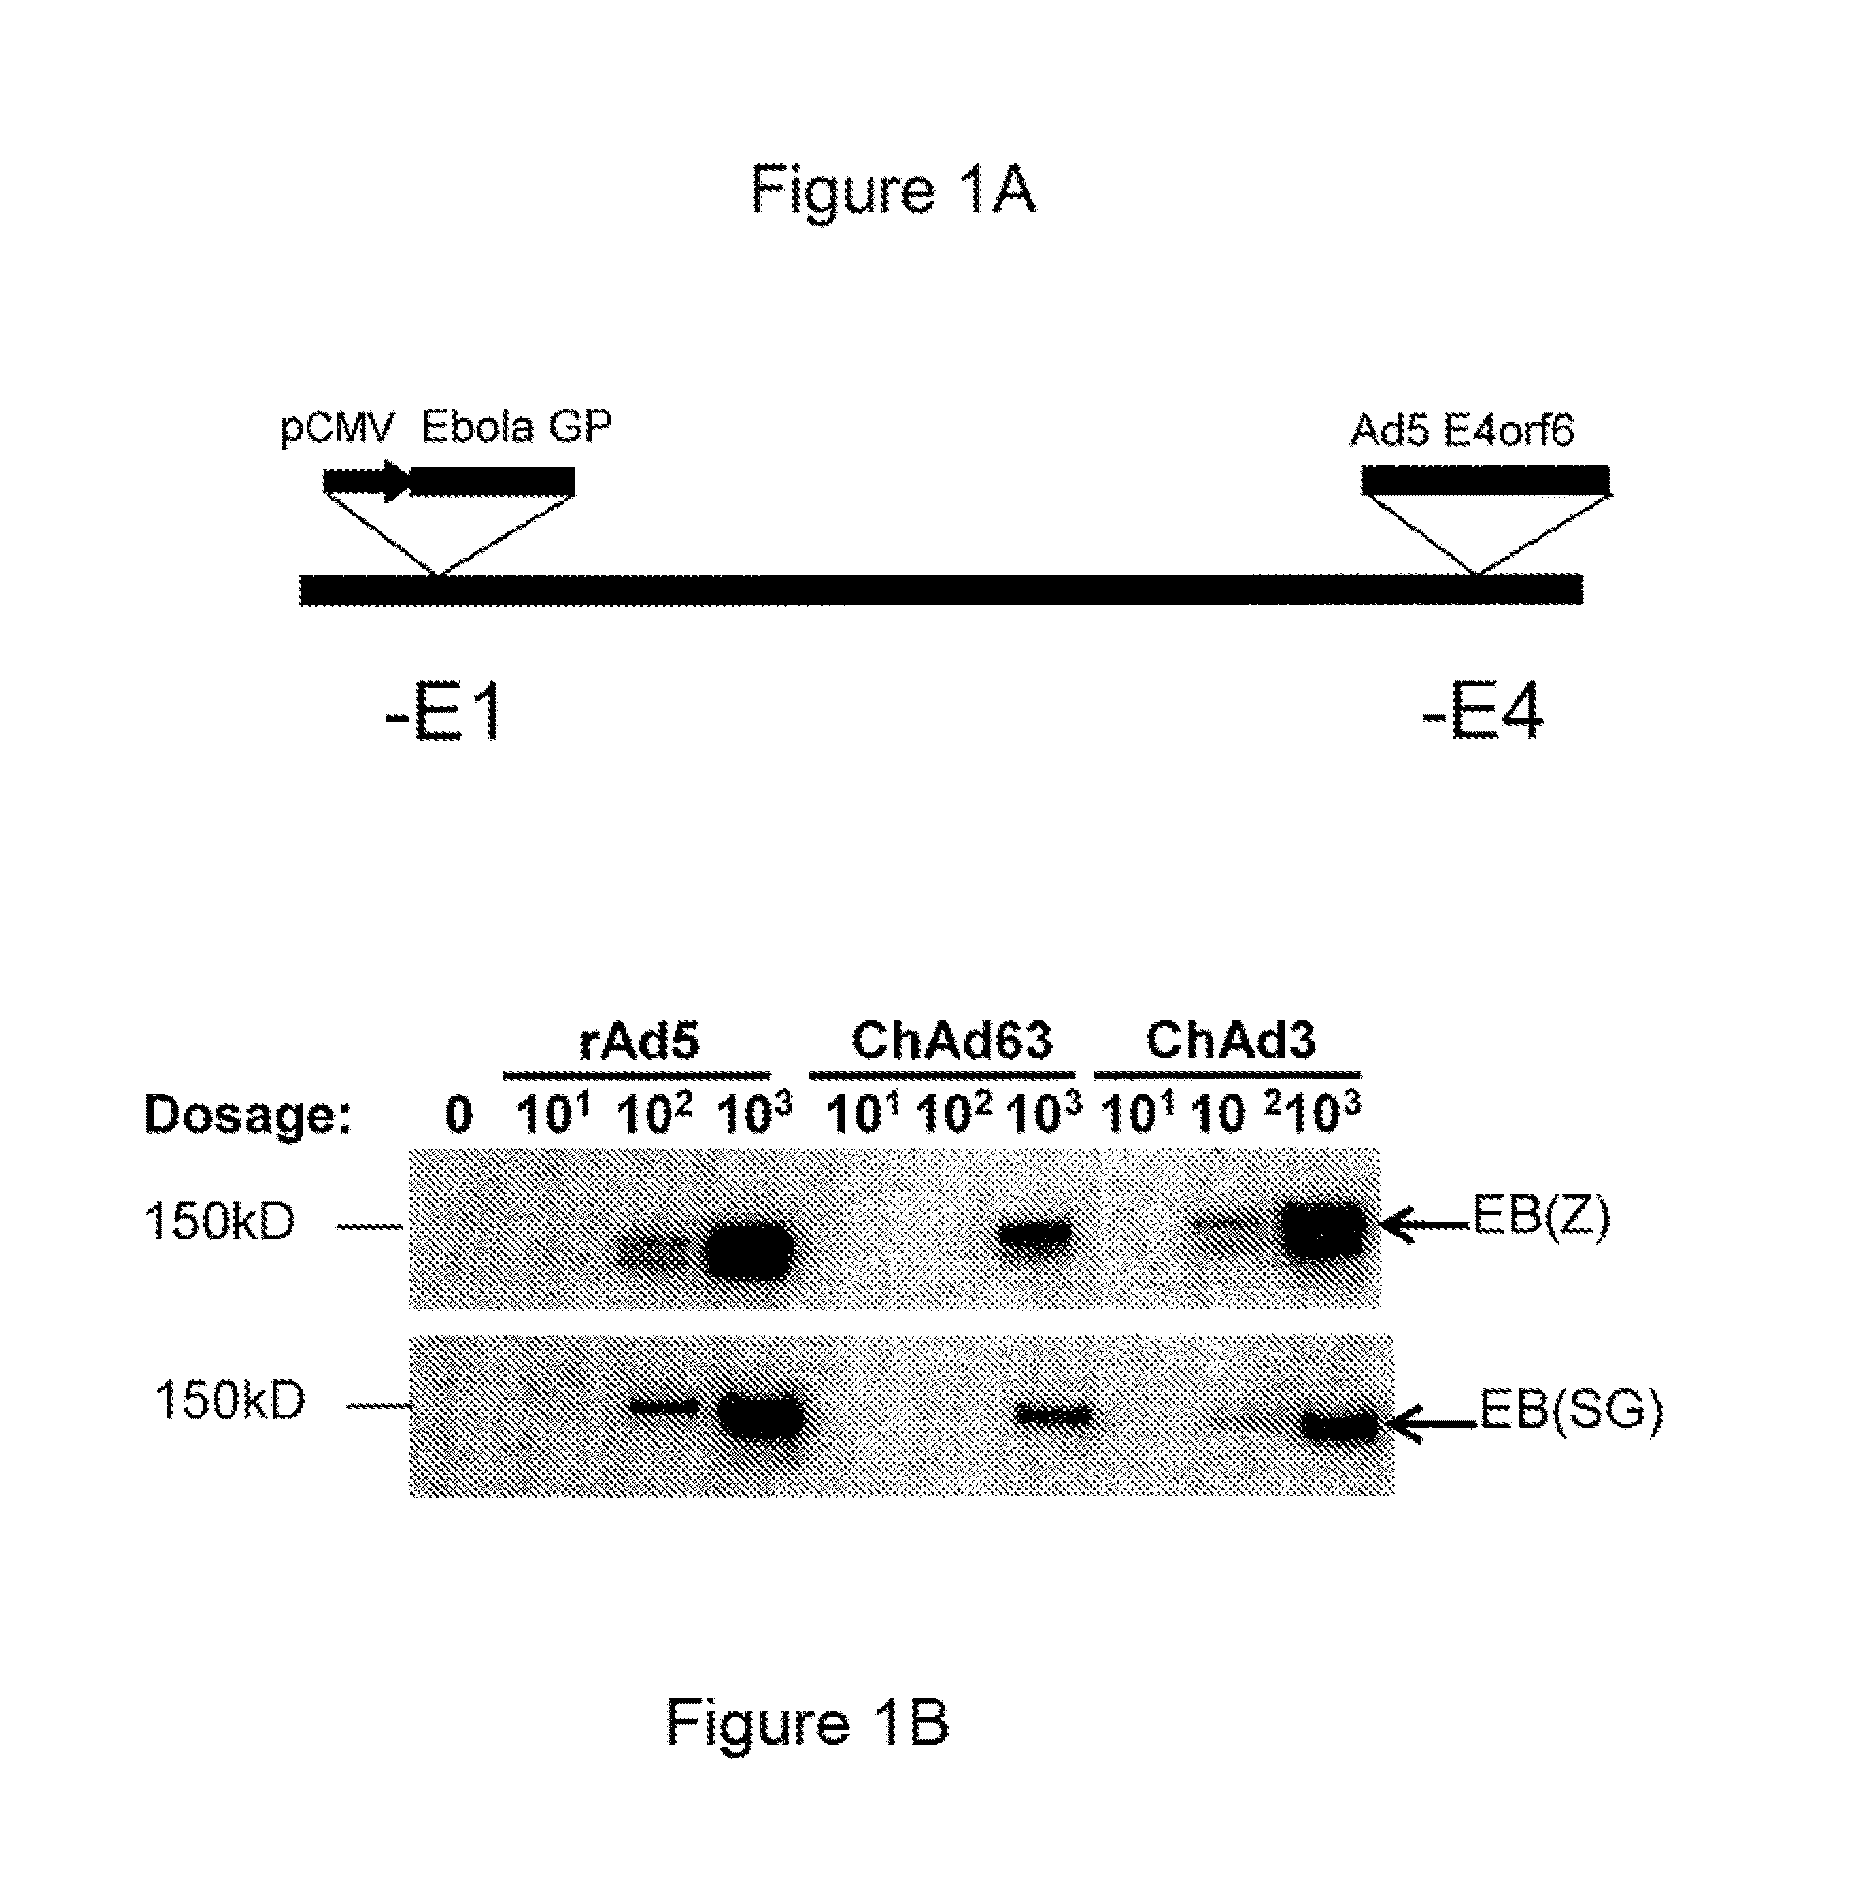 Methods for the induction of ebola virus-specific immune responses comprising administering a replication-defective chimpanzee adenovirus vector expressing the ebola virus glycoprotein